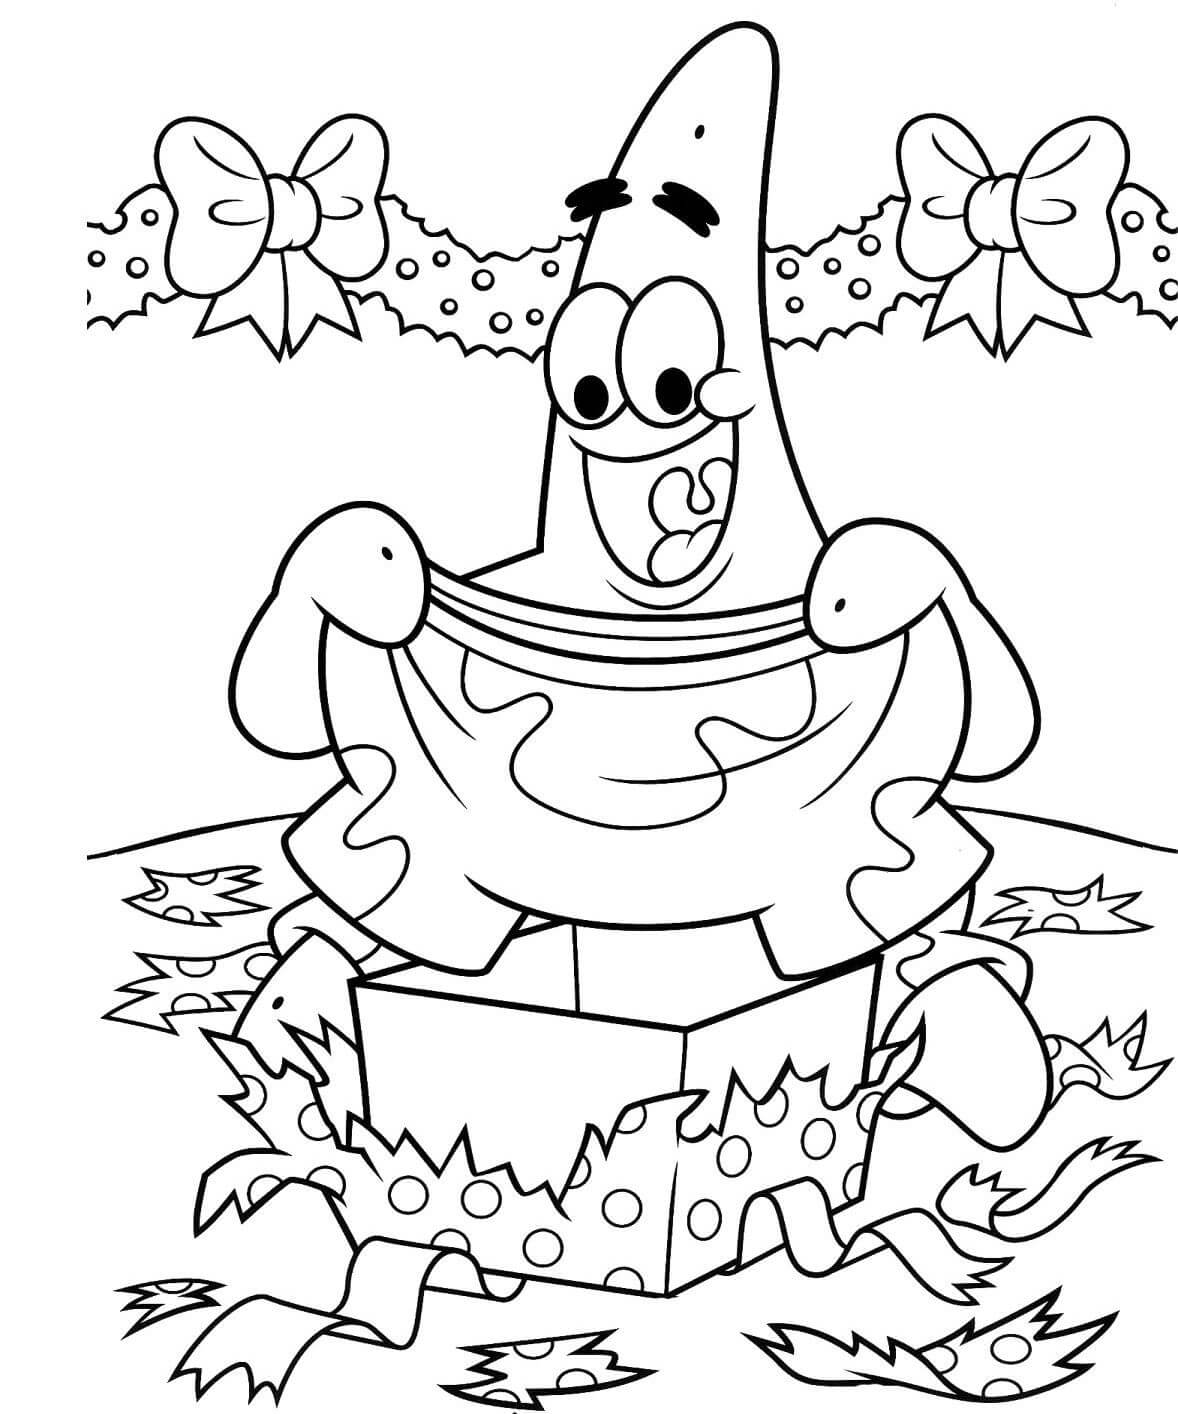 Patrick Gets A Present Coloring Page